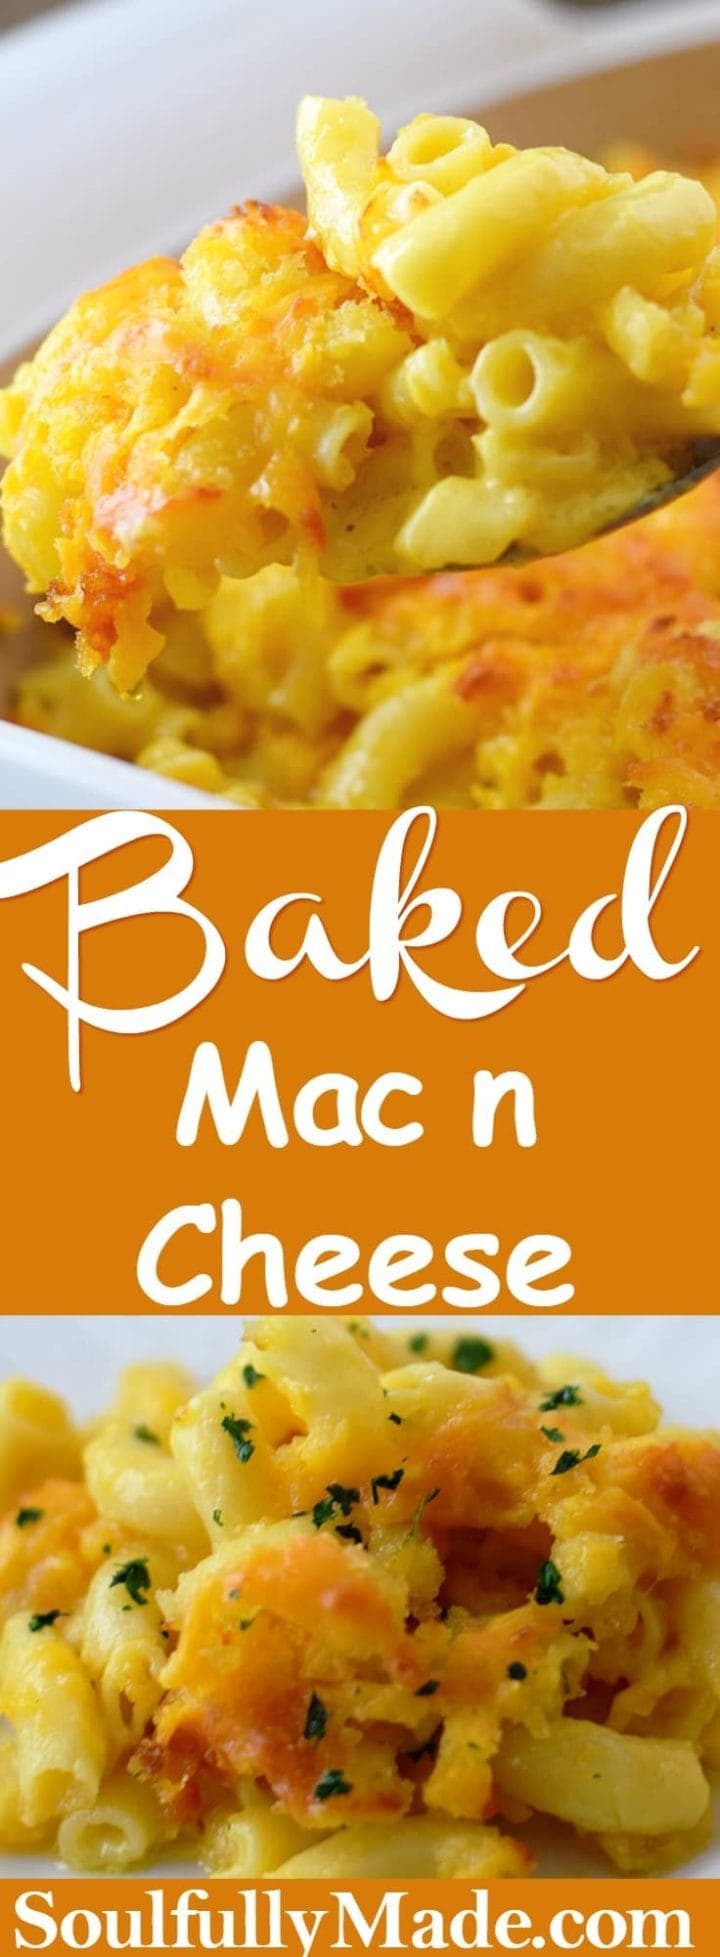 Baked Macaroni and Cheese - Soulfully Made